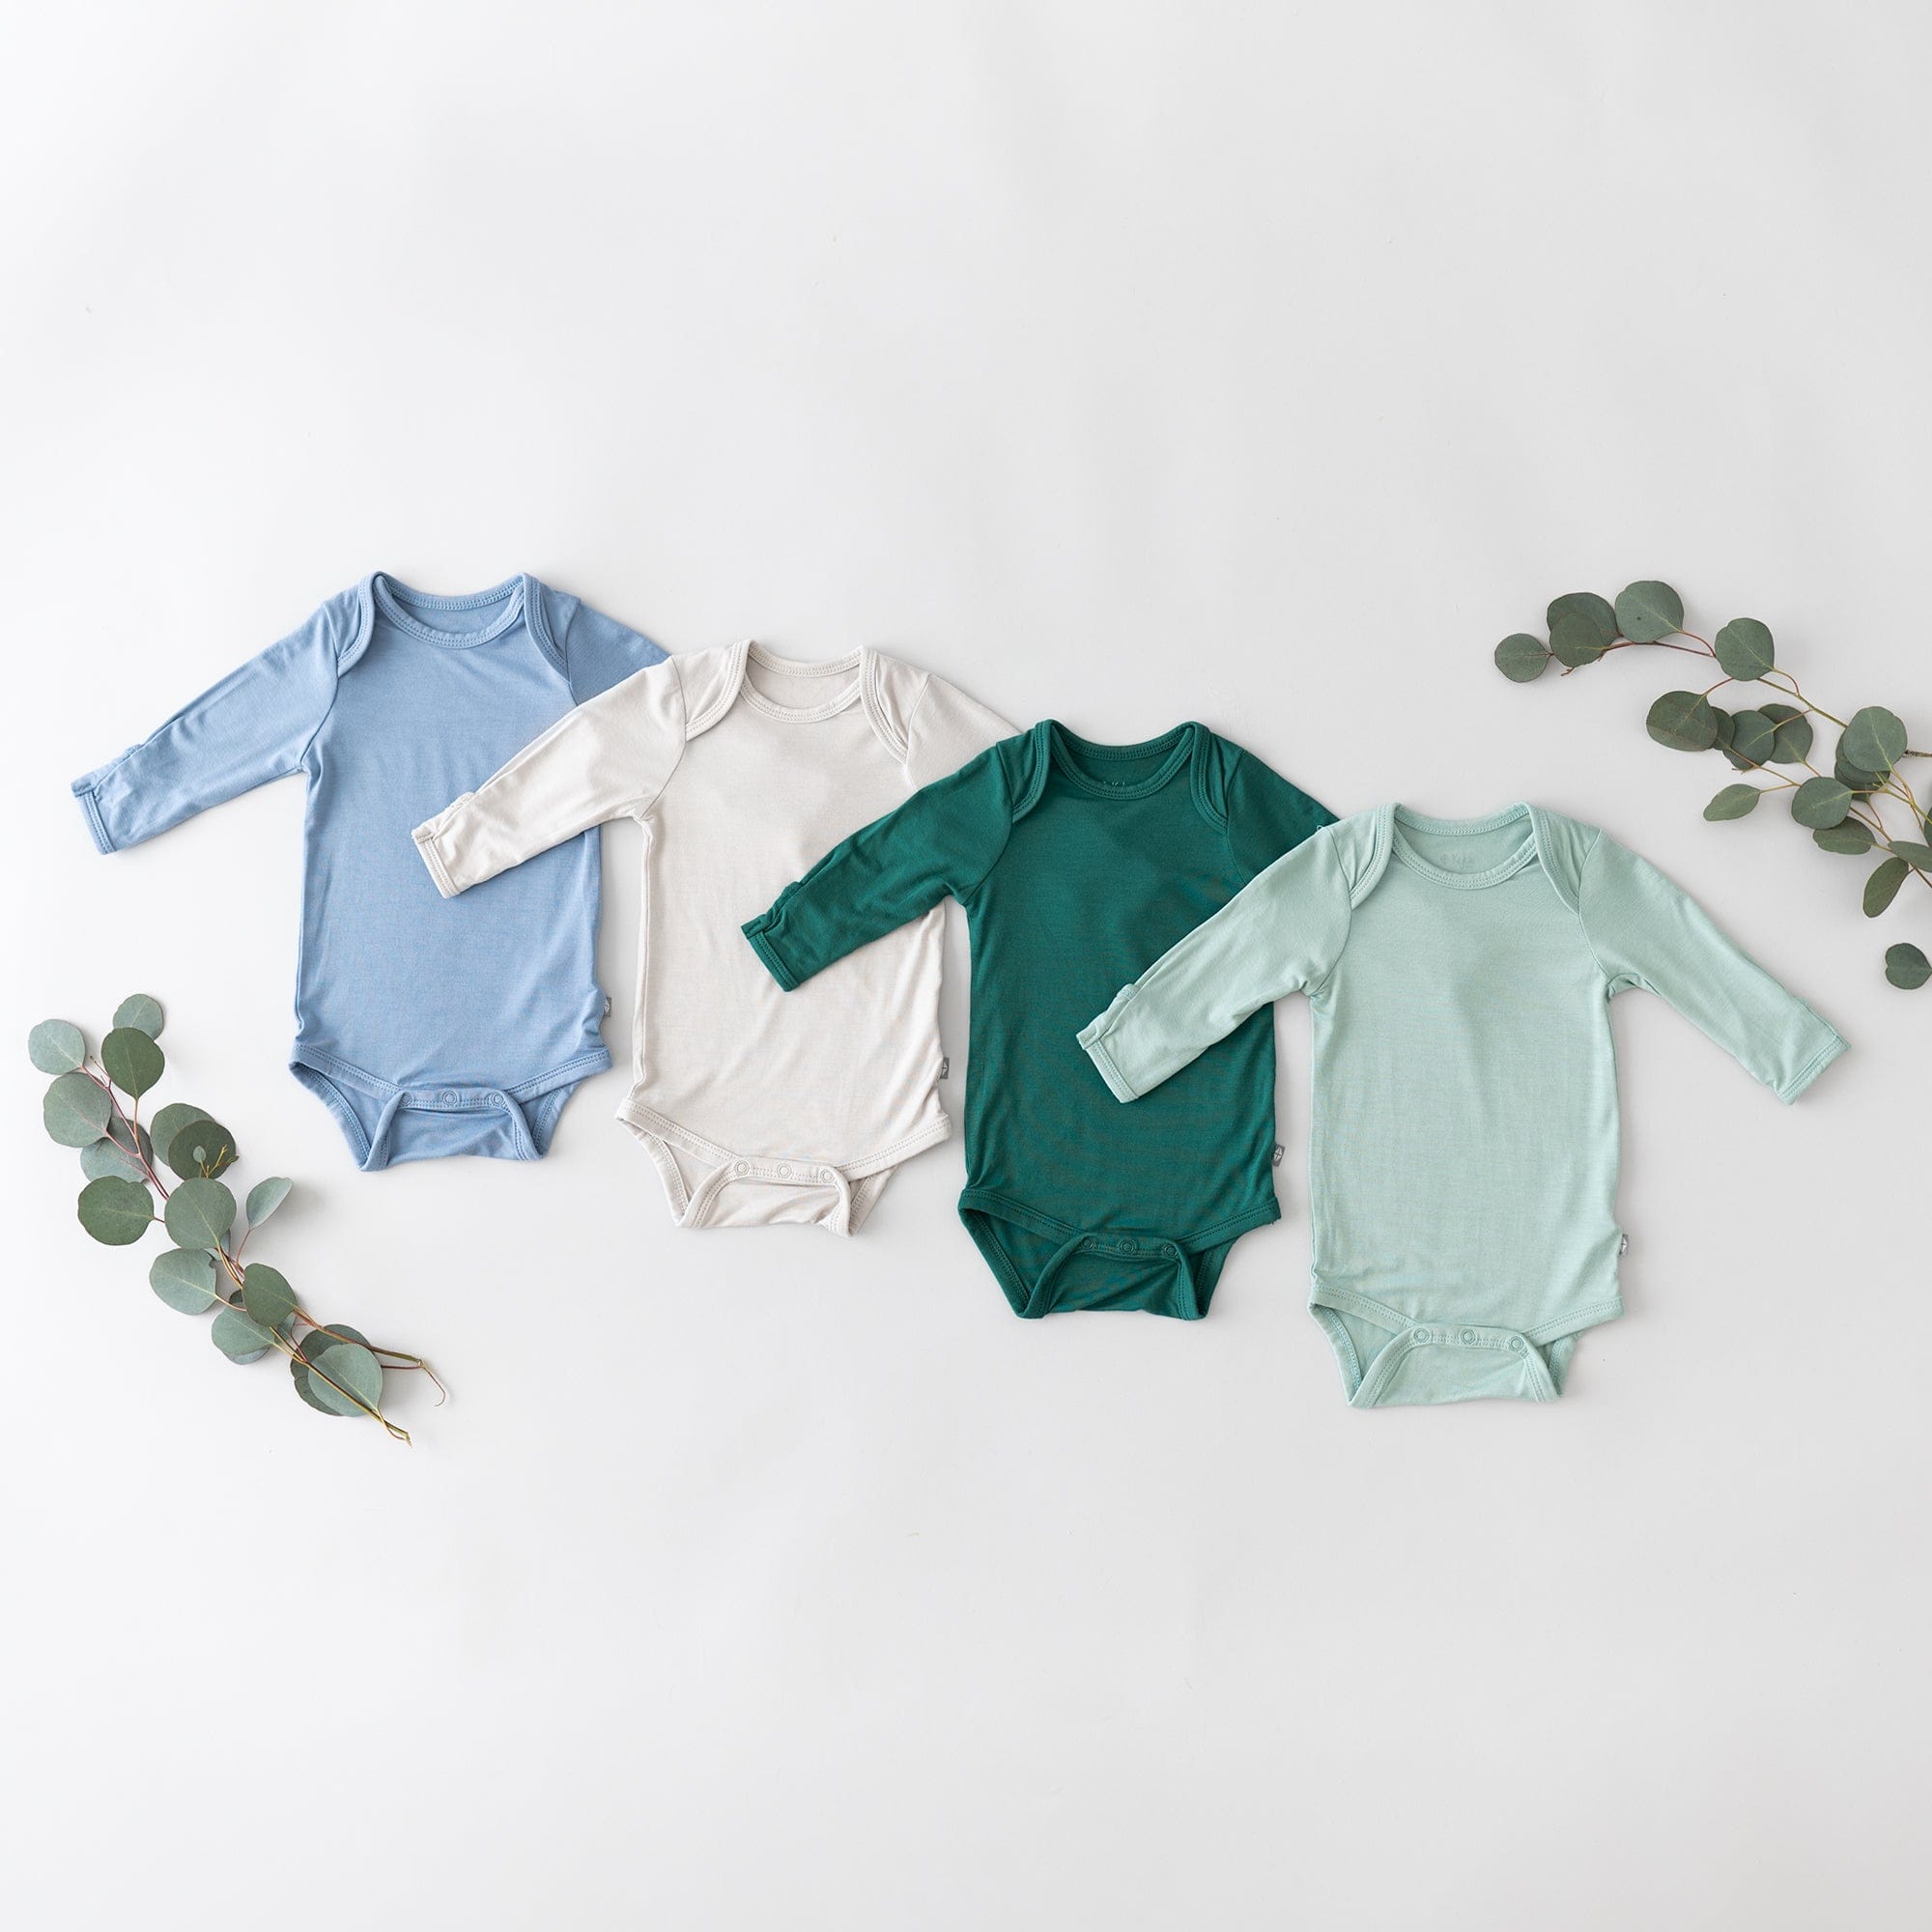 Kyte Baby Long Sleeve Bodysuits in core colors